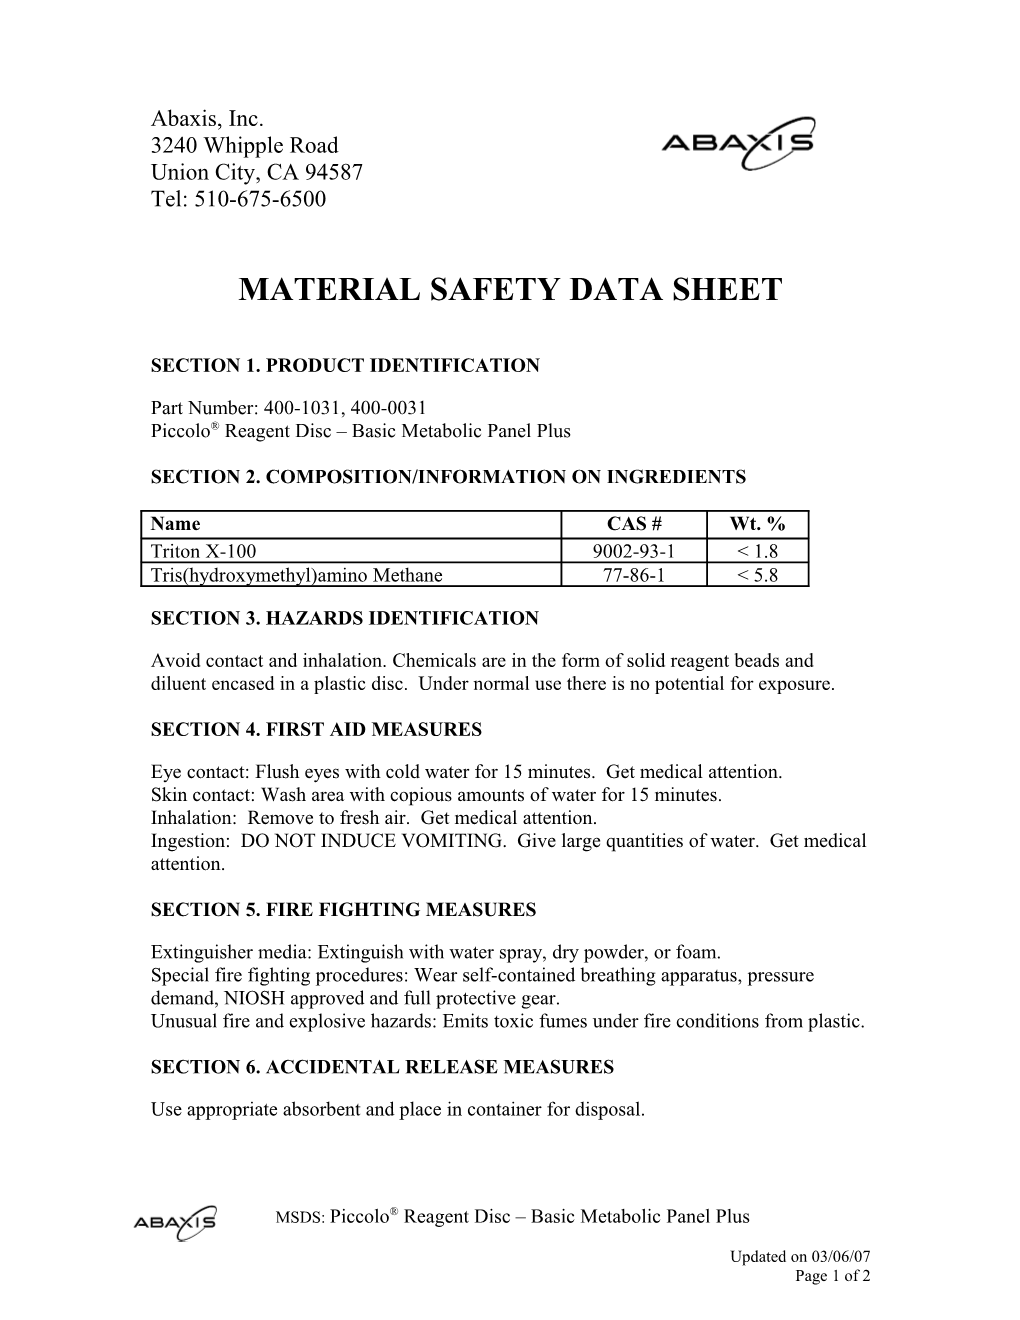 Material Safety Data Sheet s74